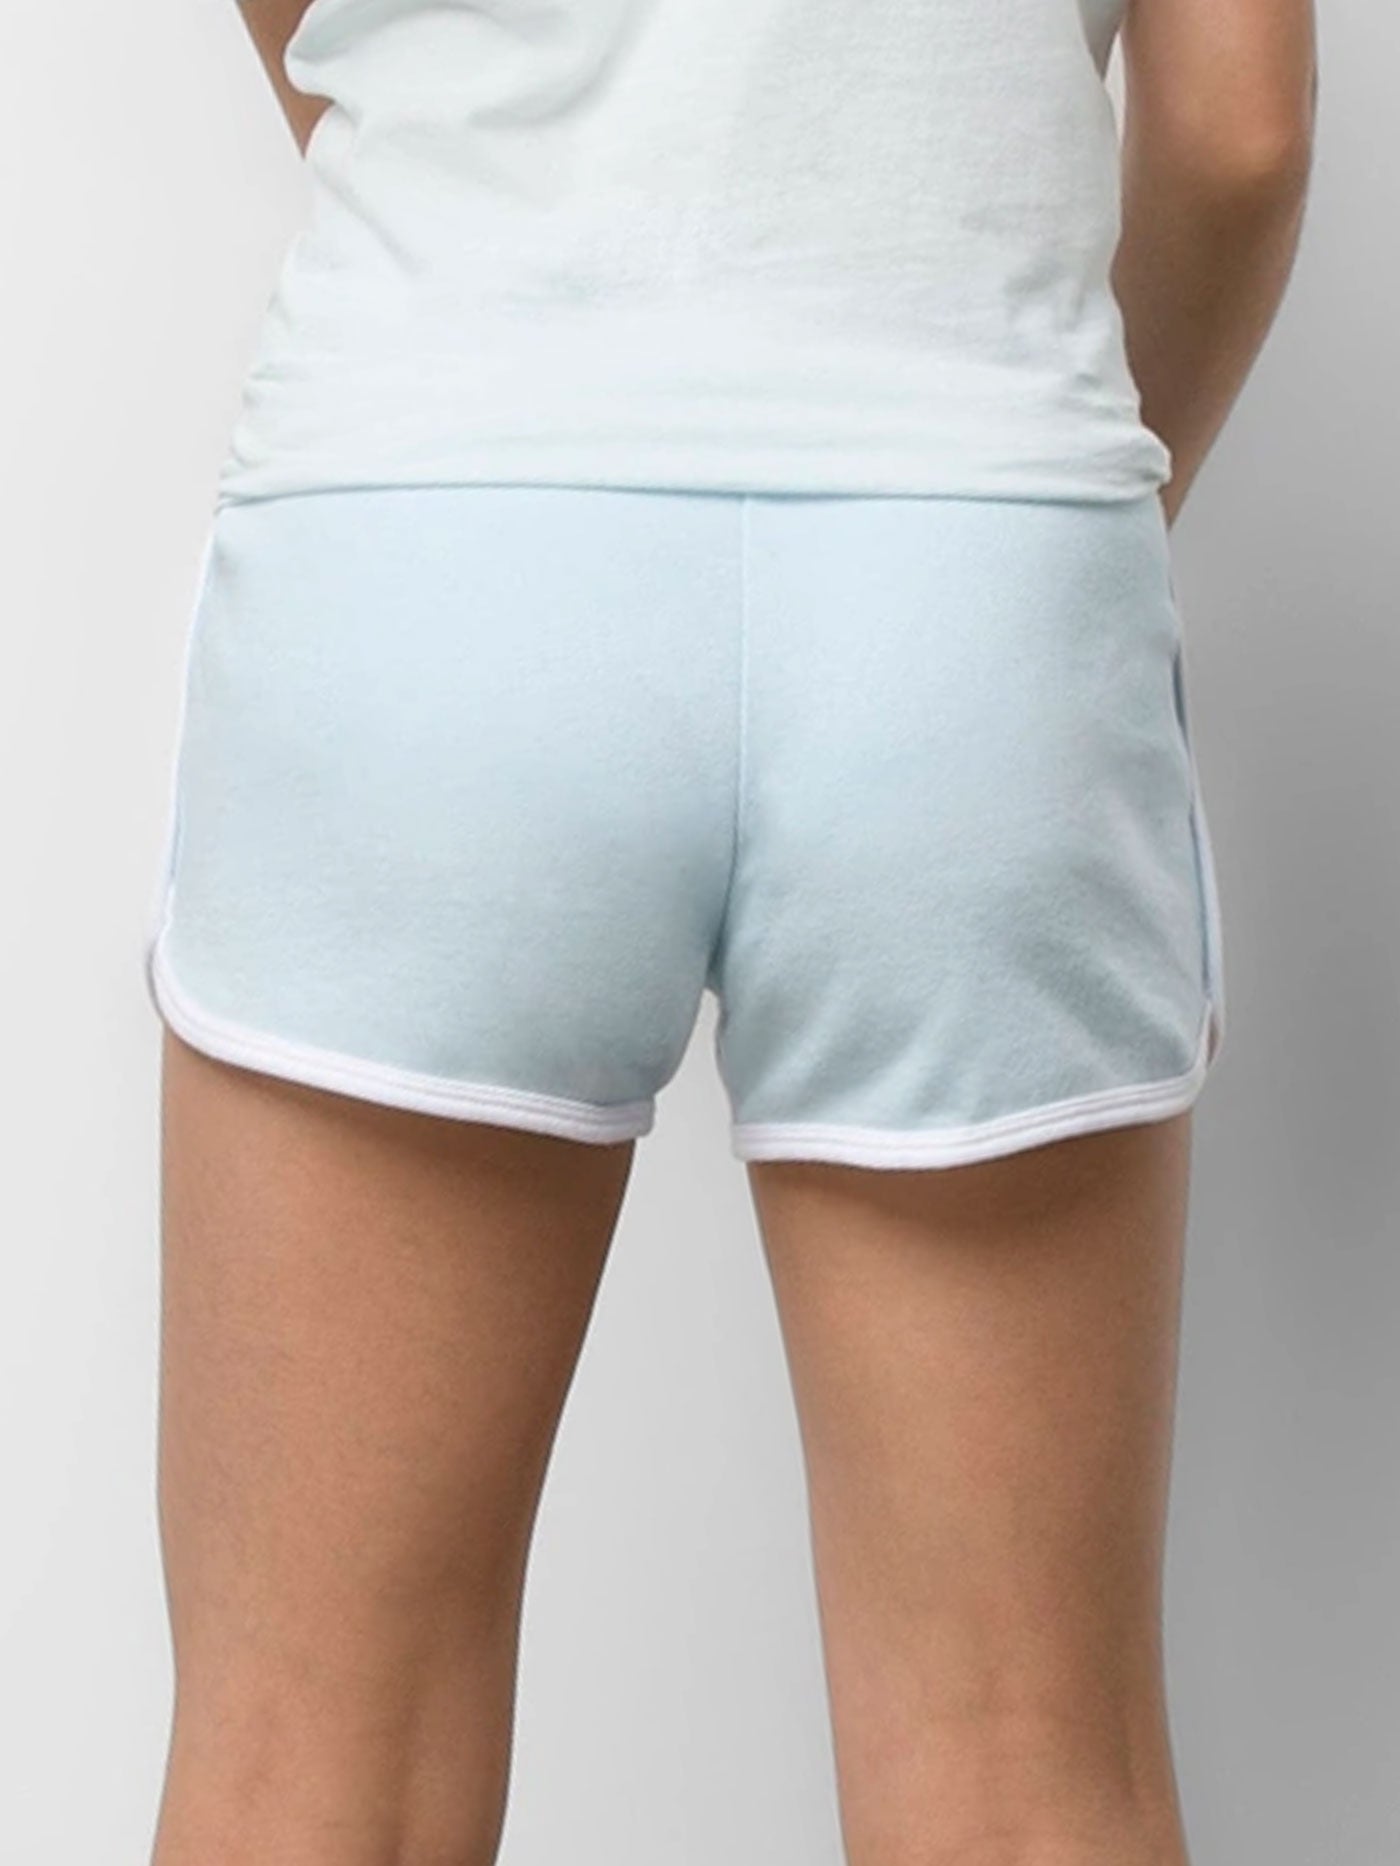 Limited Edition Vans Sas Shorts (Girls 7-14) unique style for All the people